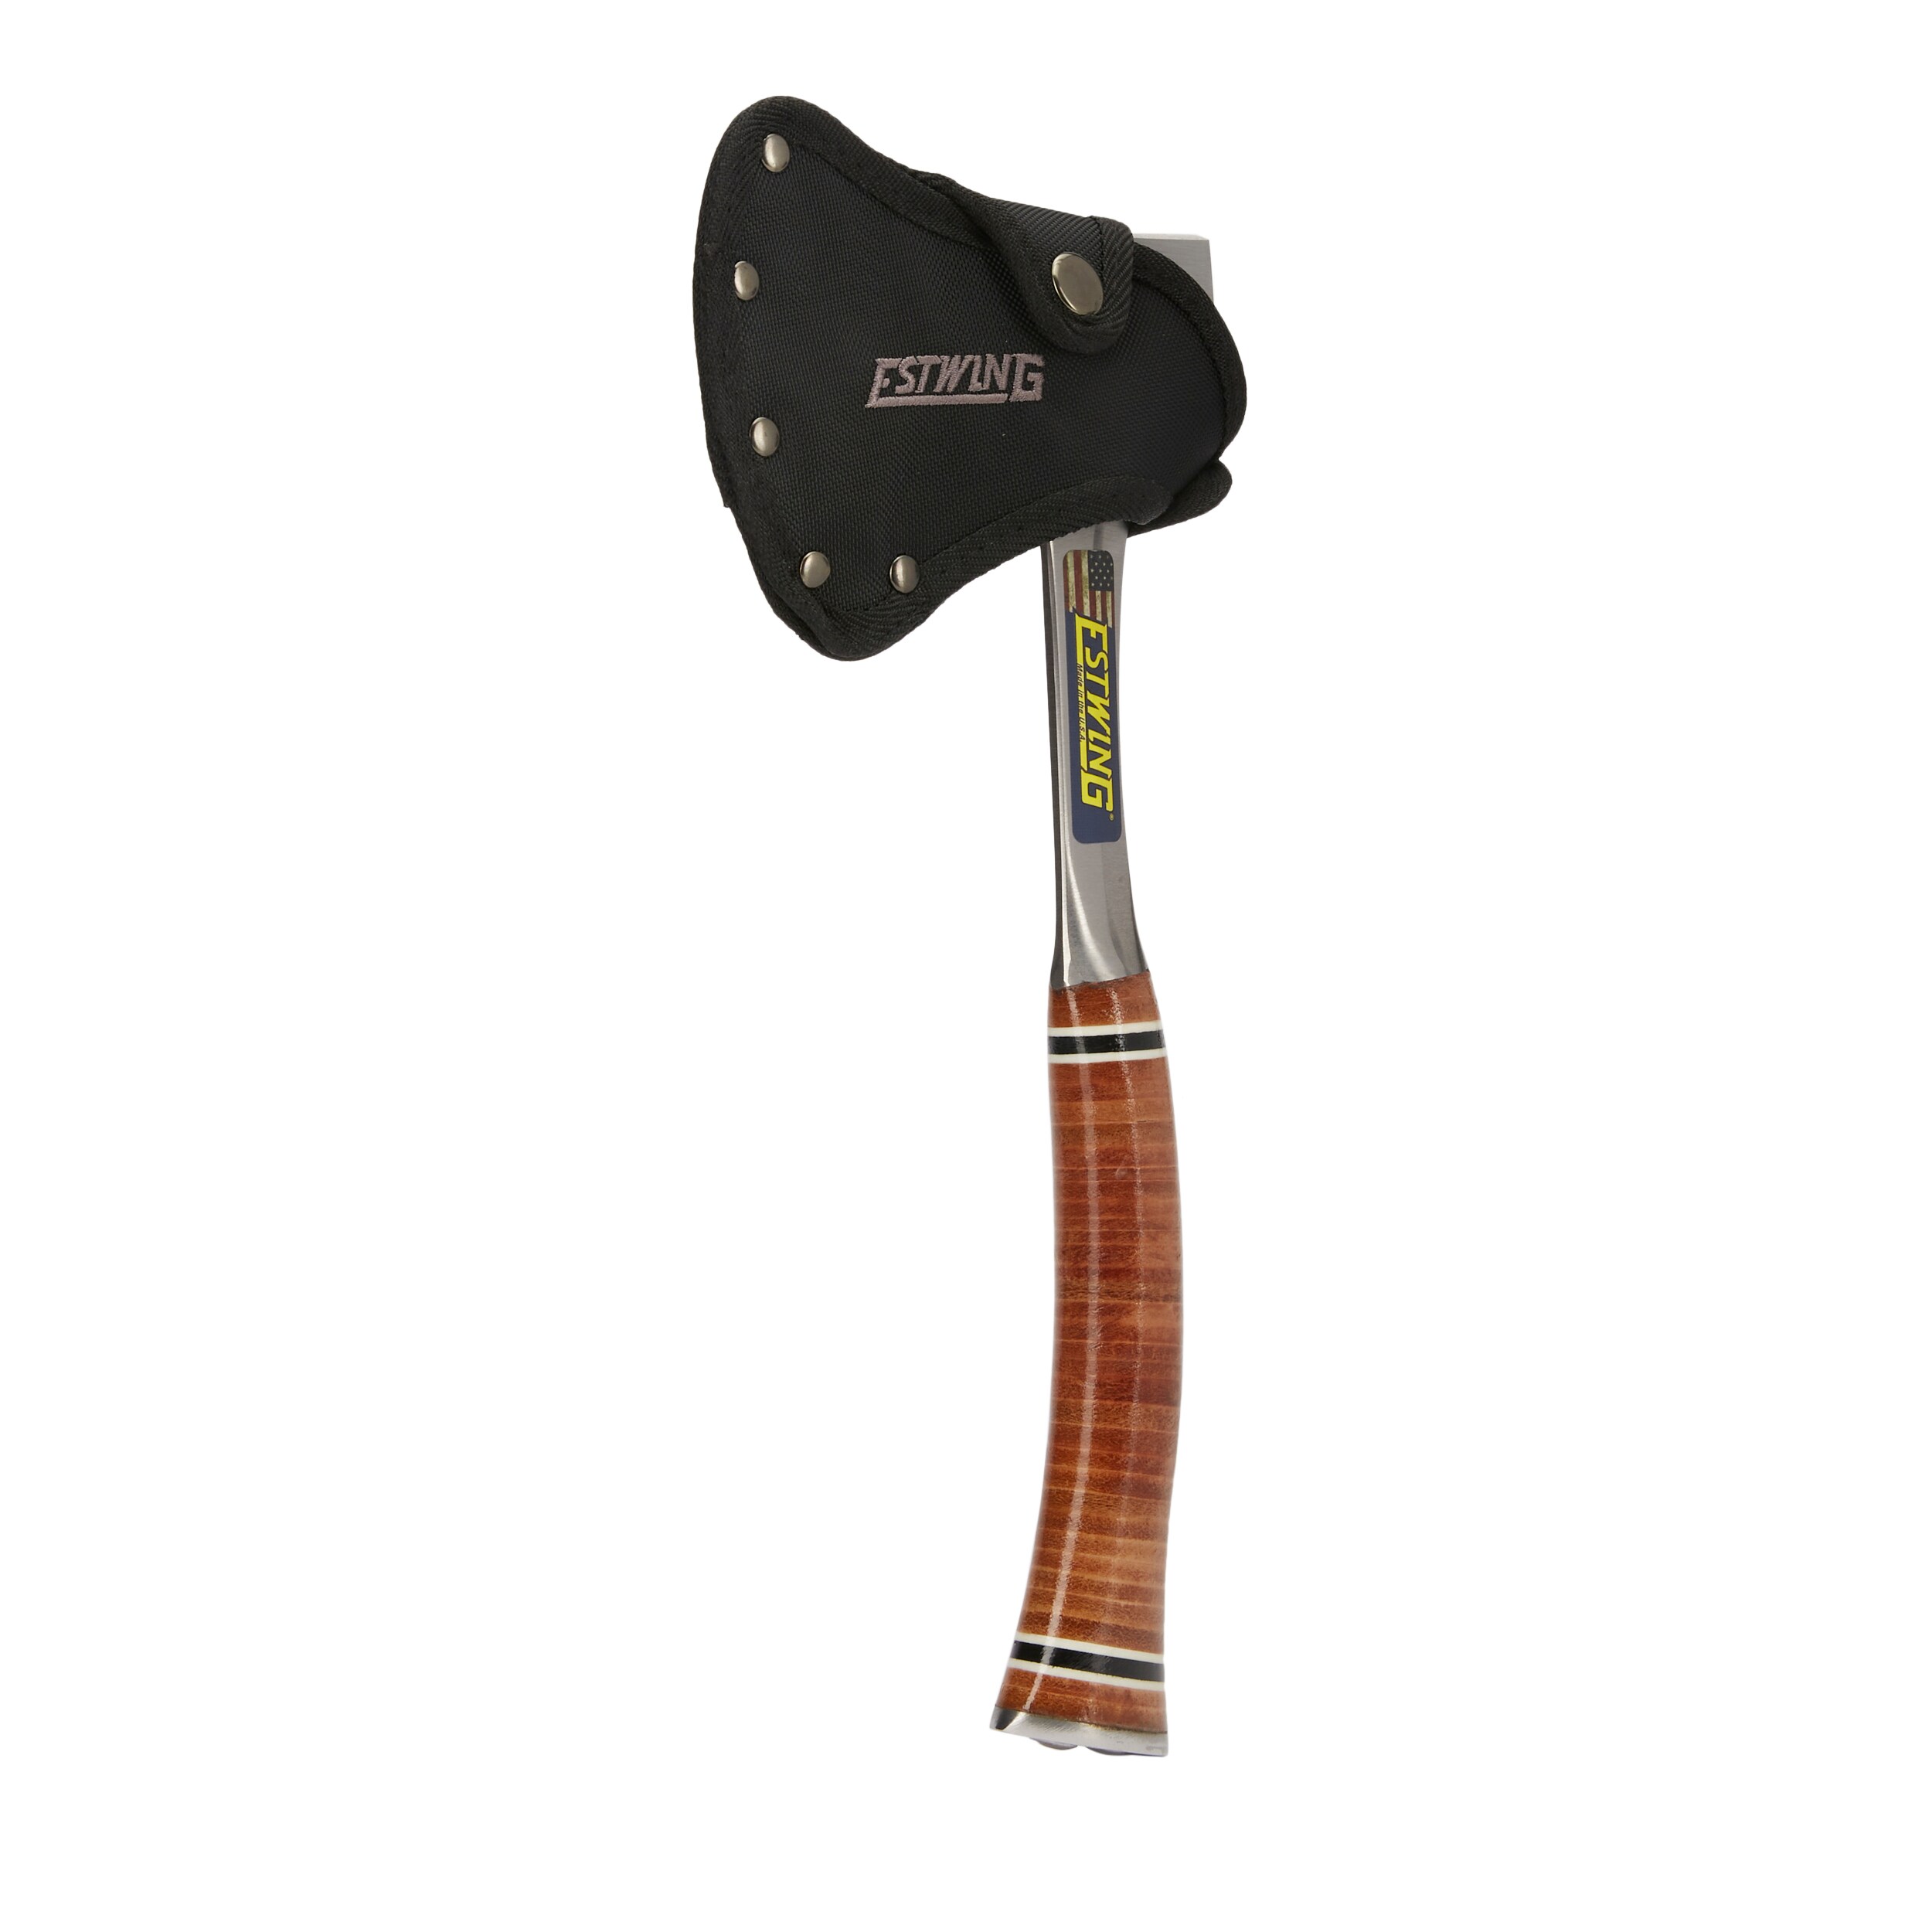 Estwing Special Edition Sportsman's Axe 14" Camping Hatchet with Forged Steel 